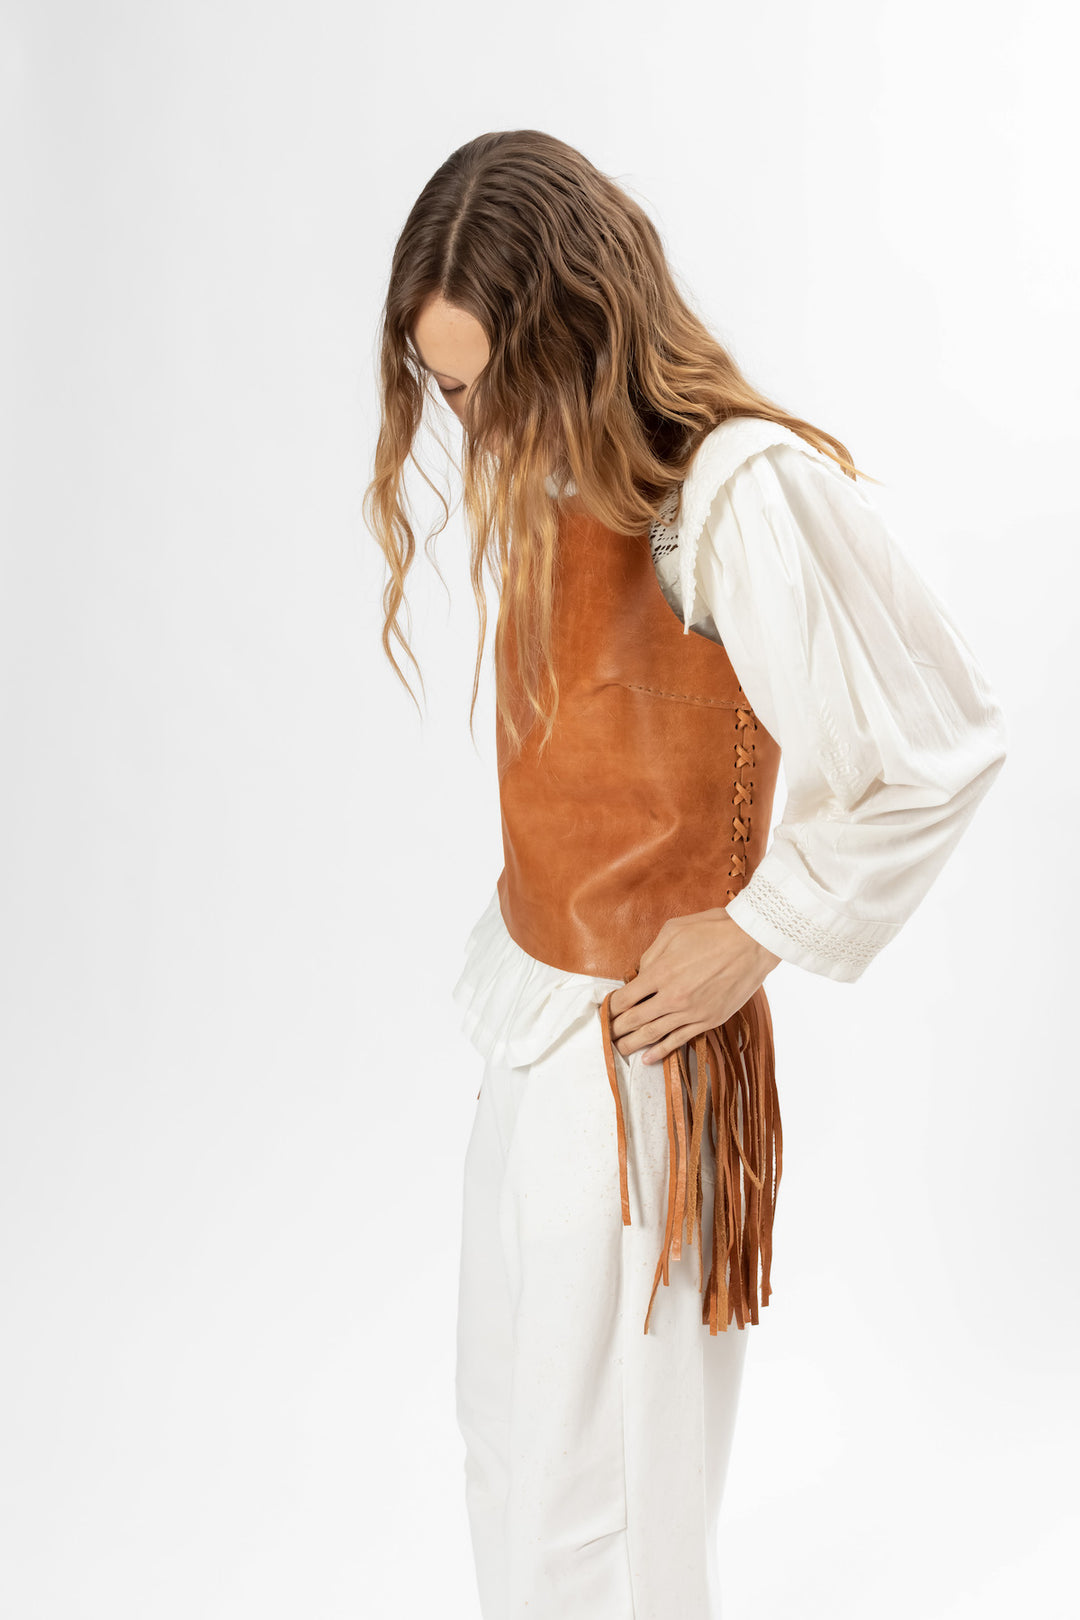 Chic Leather top with fringes. Hand Matters.